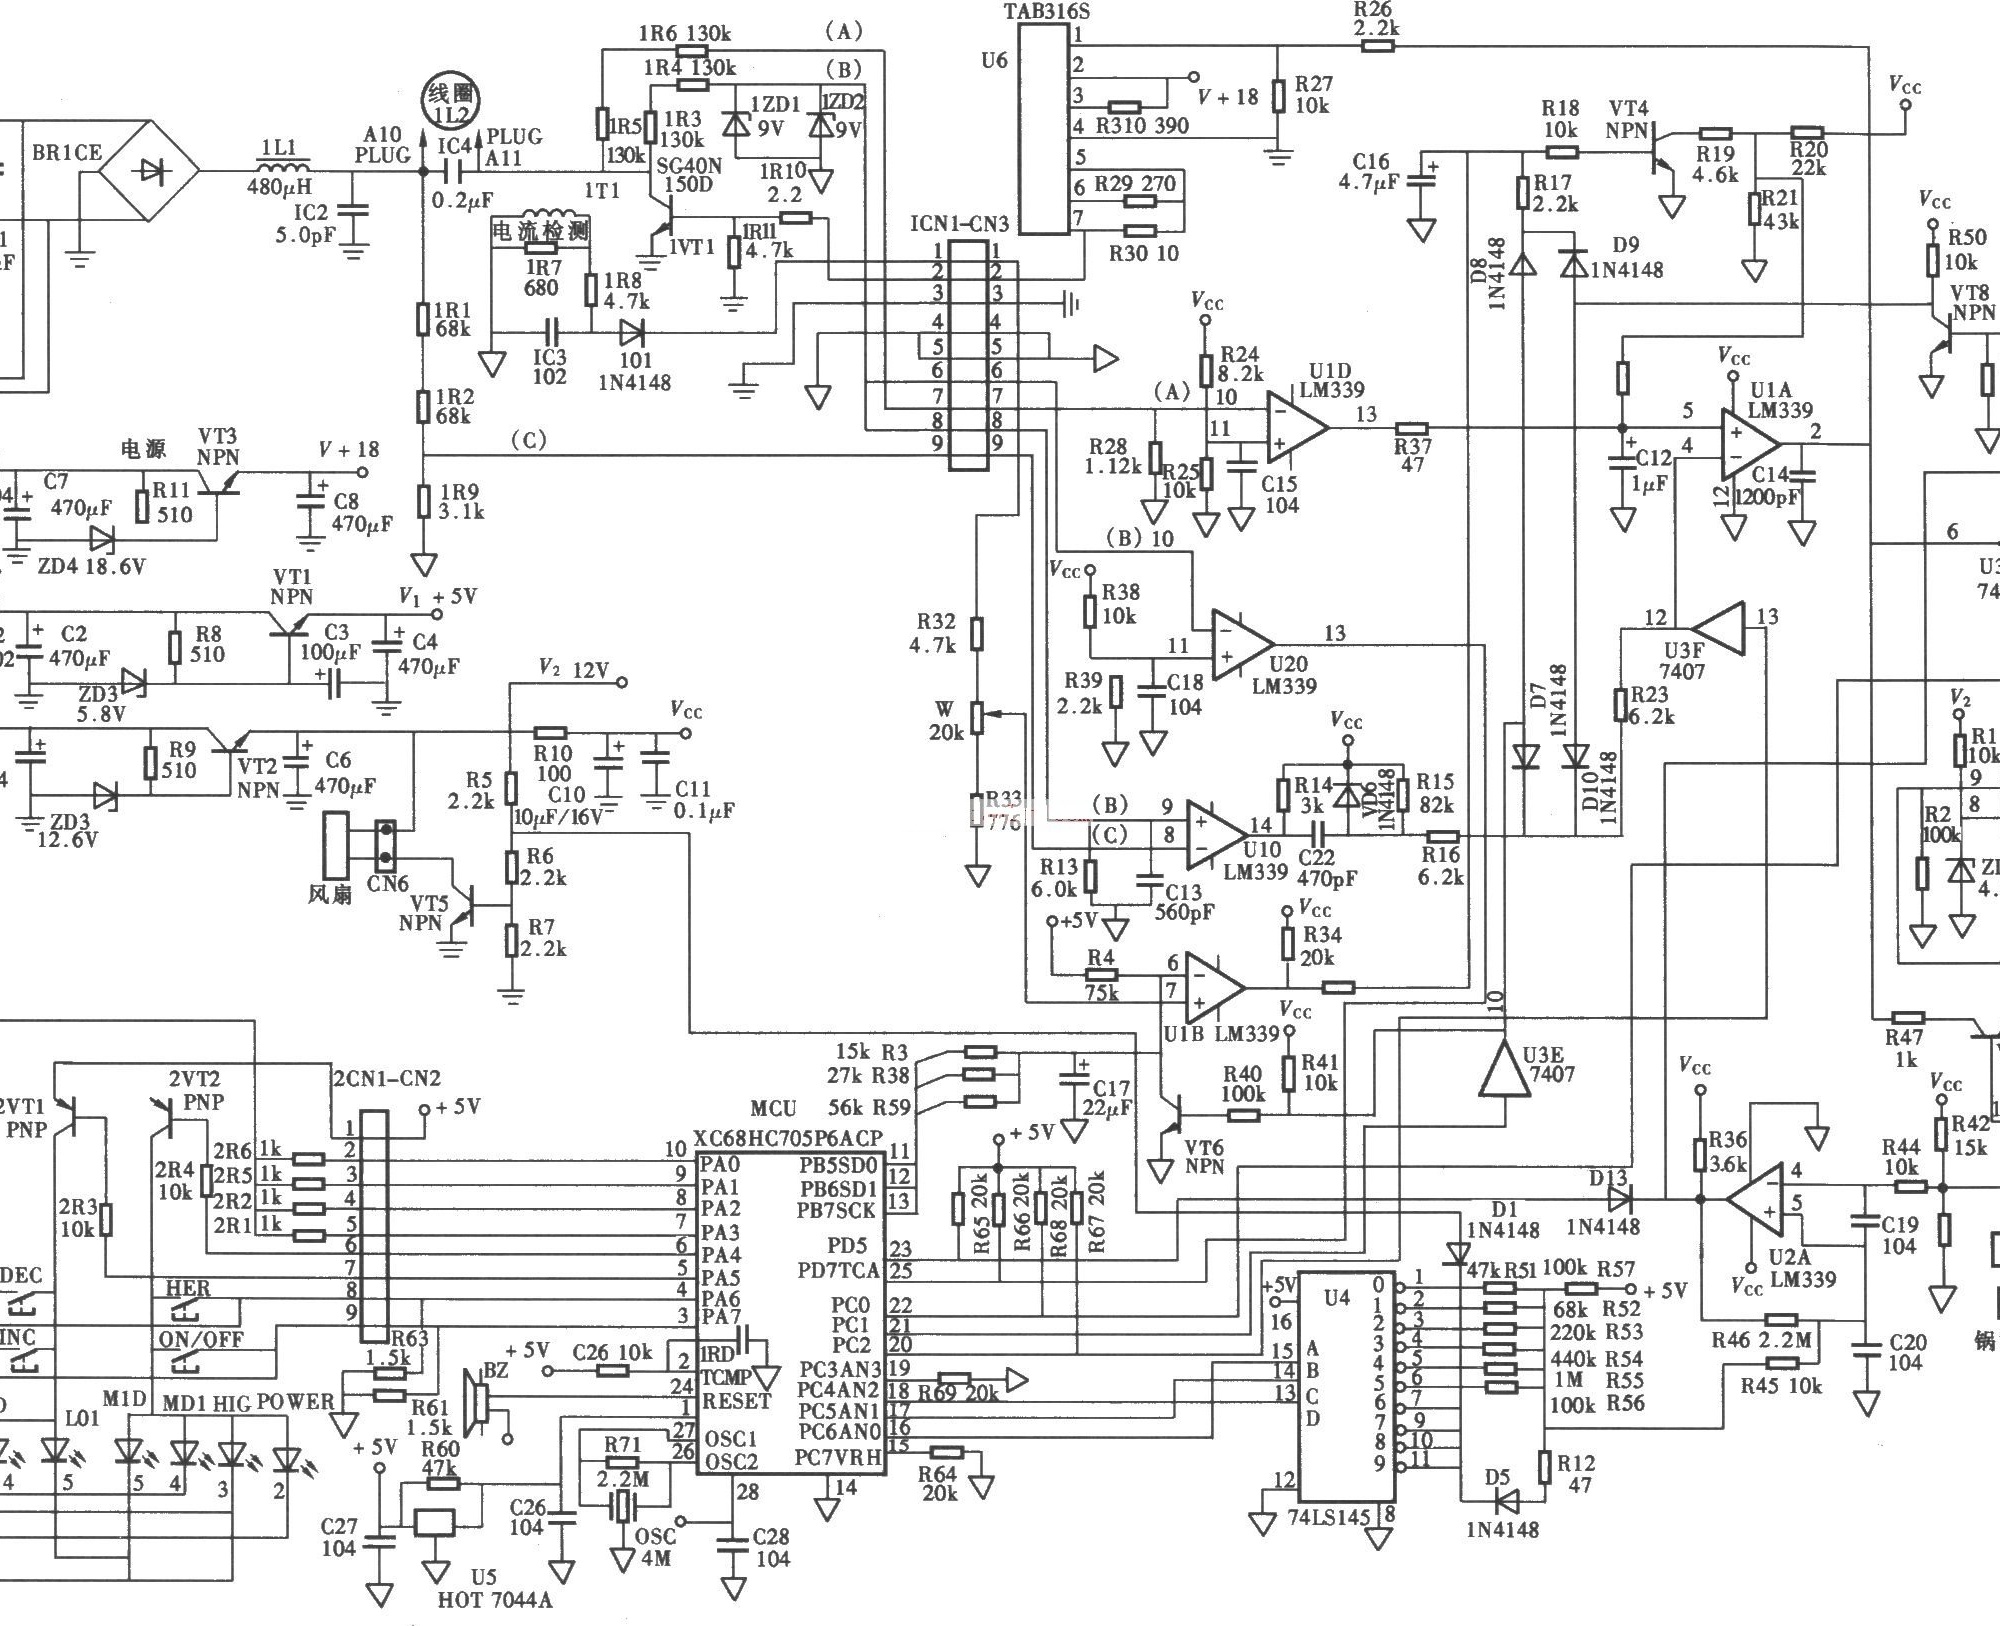 DC2-13 Wanbao Induction Cooker Schematic